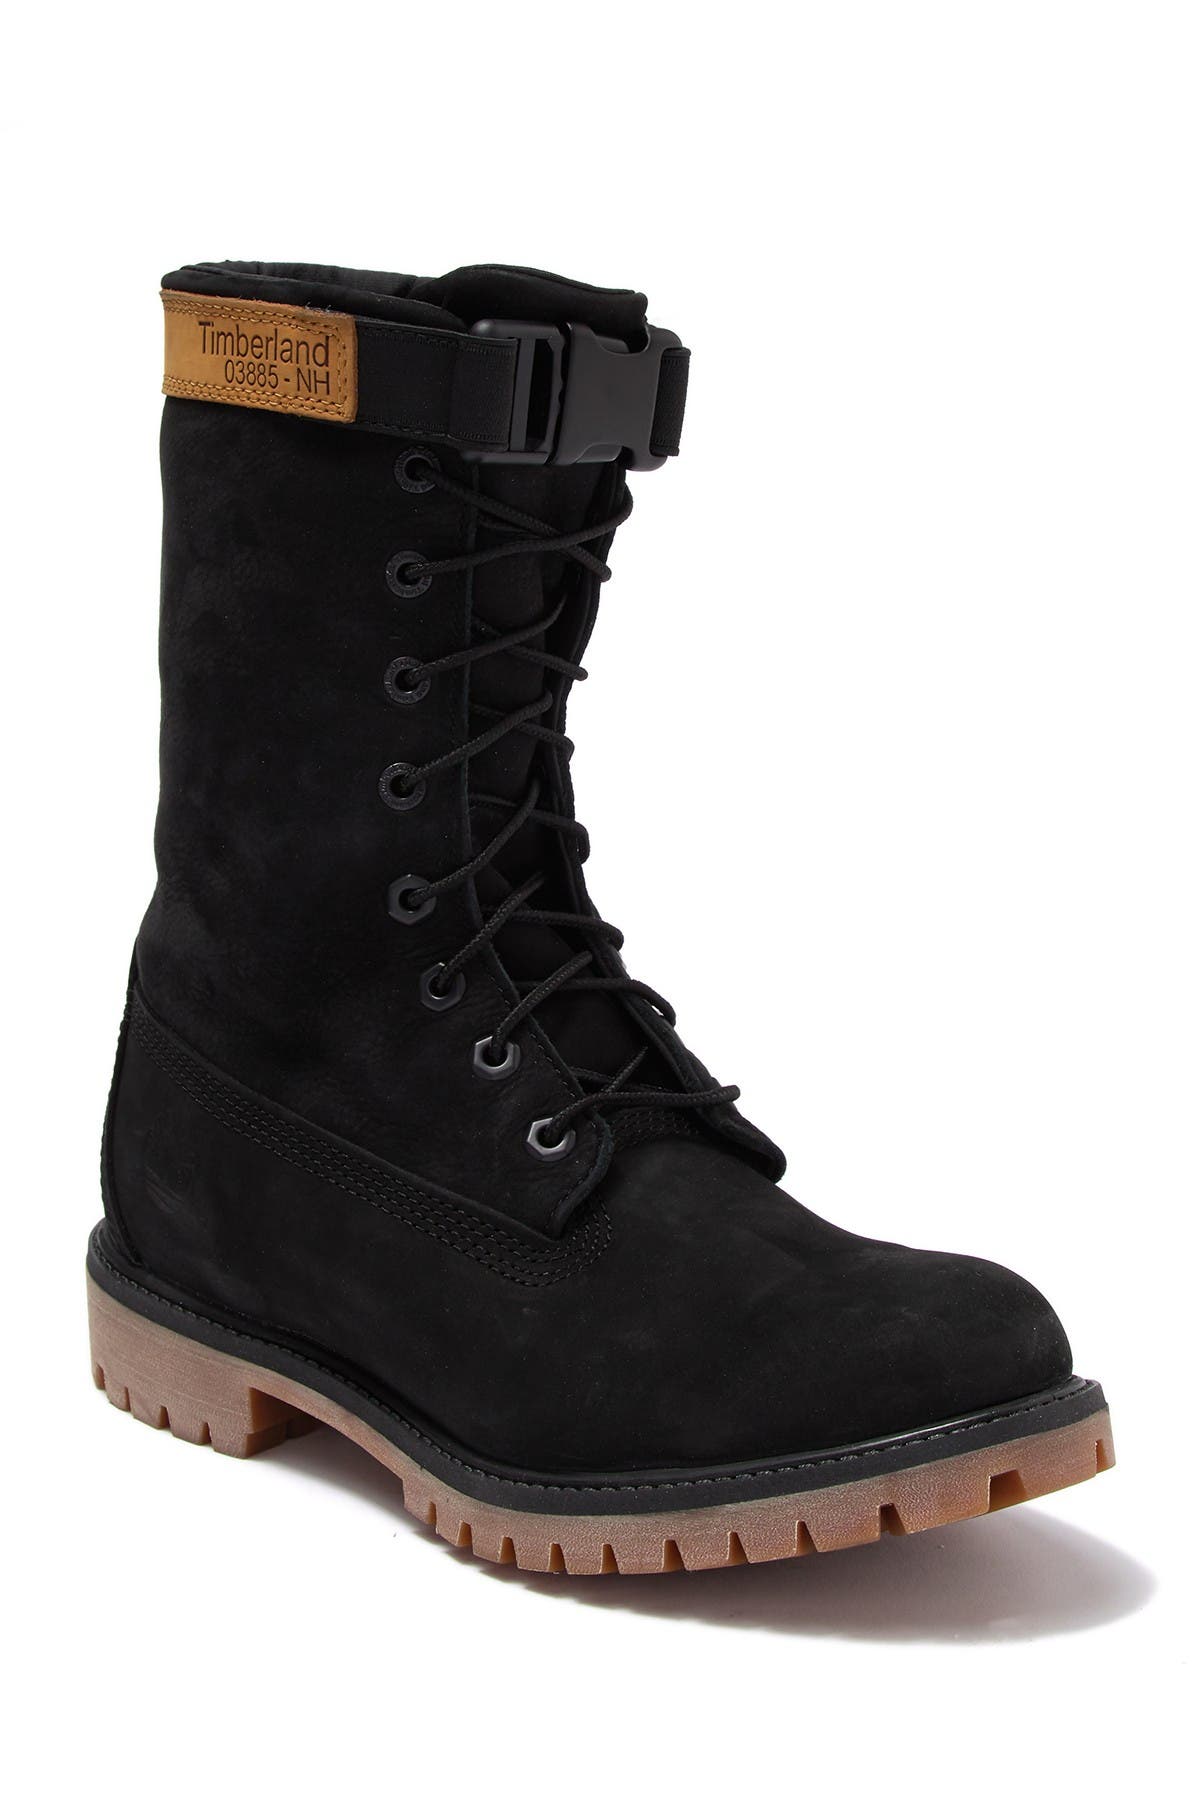 mens timberland boots nordstrom rack